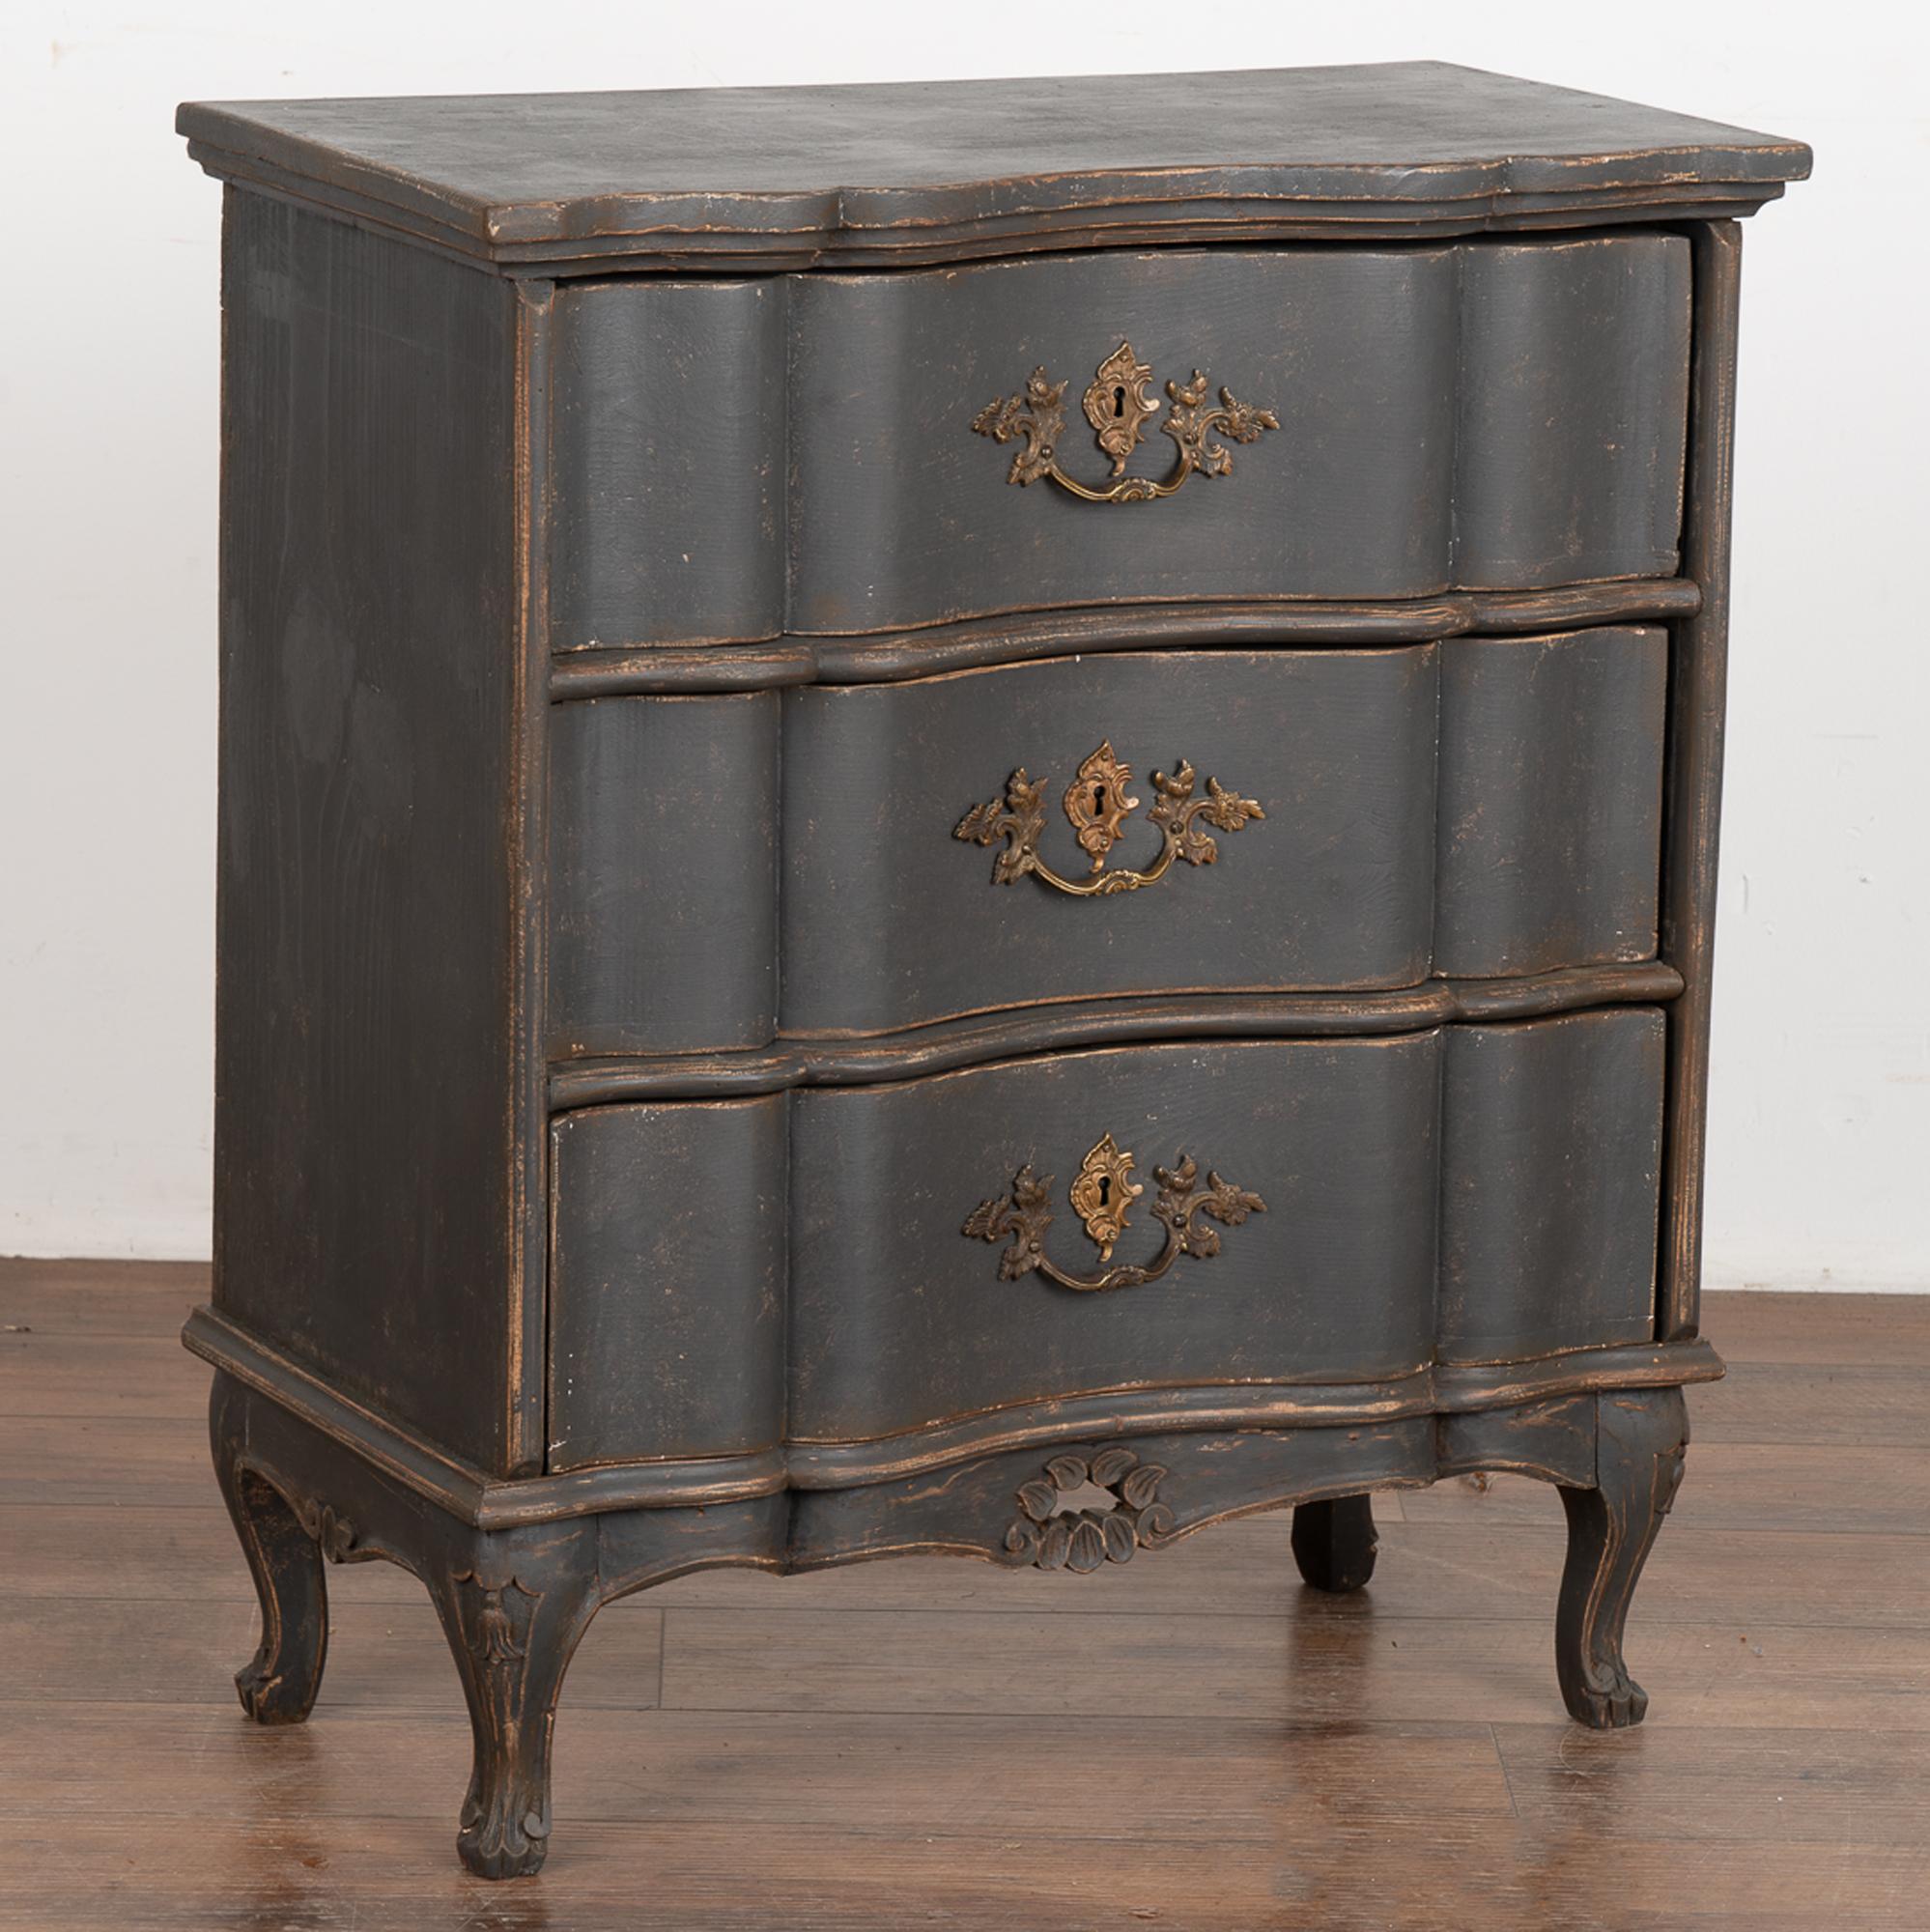 This small chest of three drawers has a touch of dramatic appeal thanks to the (newer) black painted finish that is gently distressed, accenting the Rococo curves and cabriole feet.
The size makes it adaptable to use as a nightstand, side table or